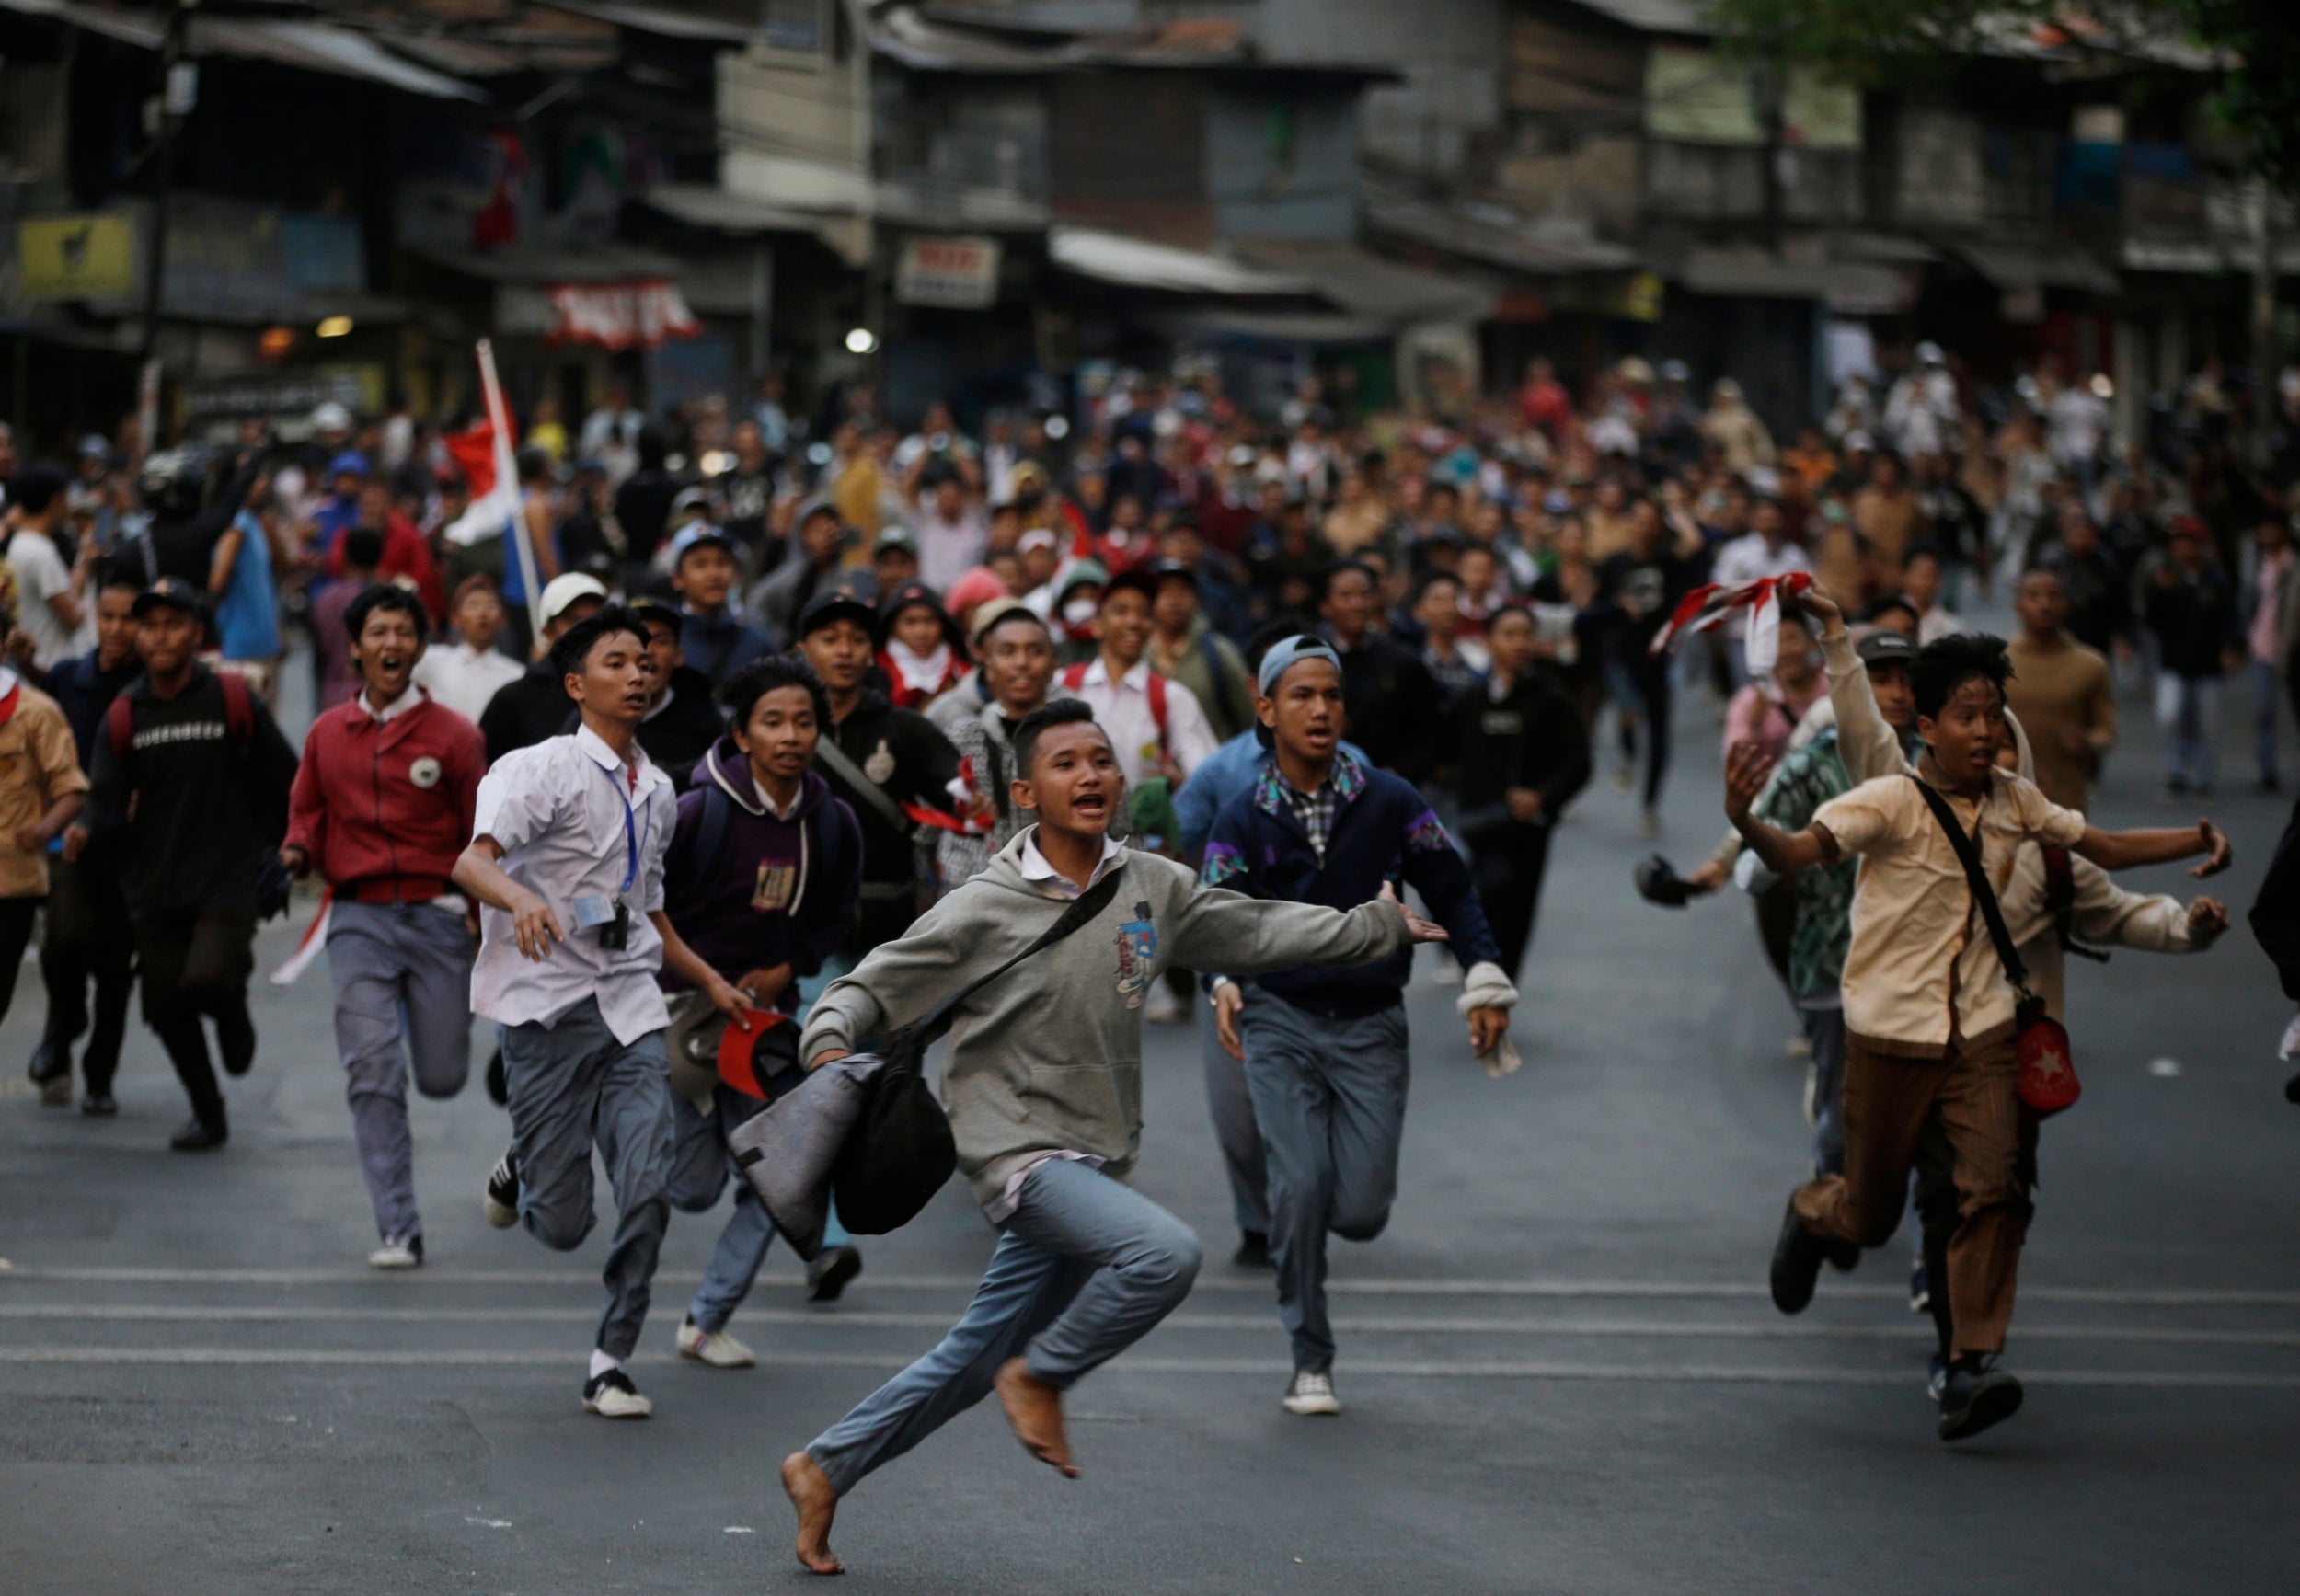 Students run during a protest in Jakarta, Indonesia on Wednesday